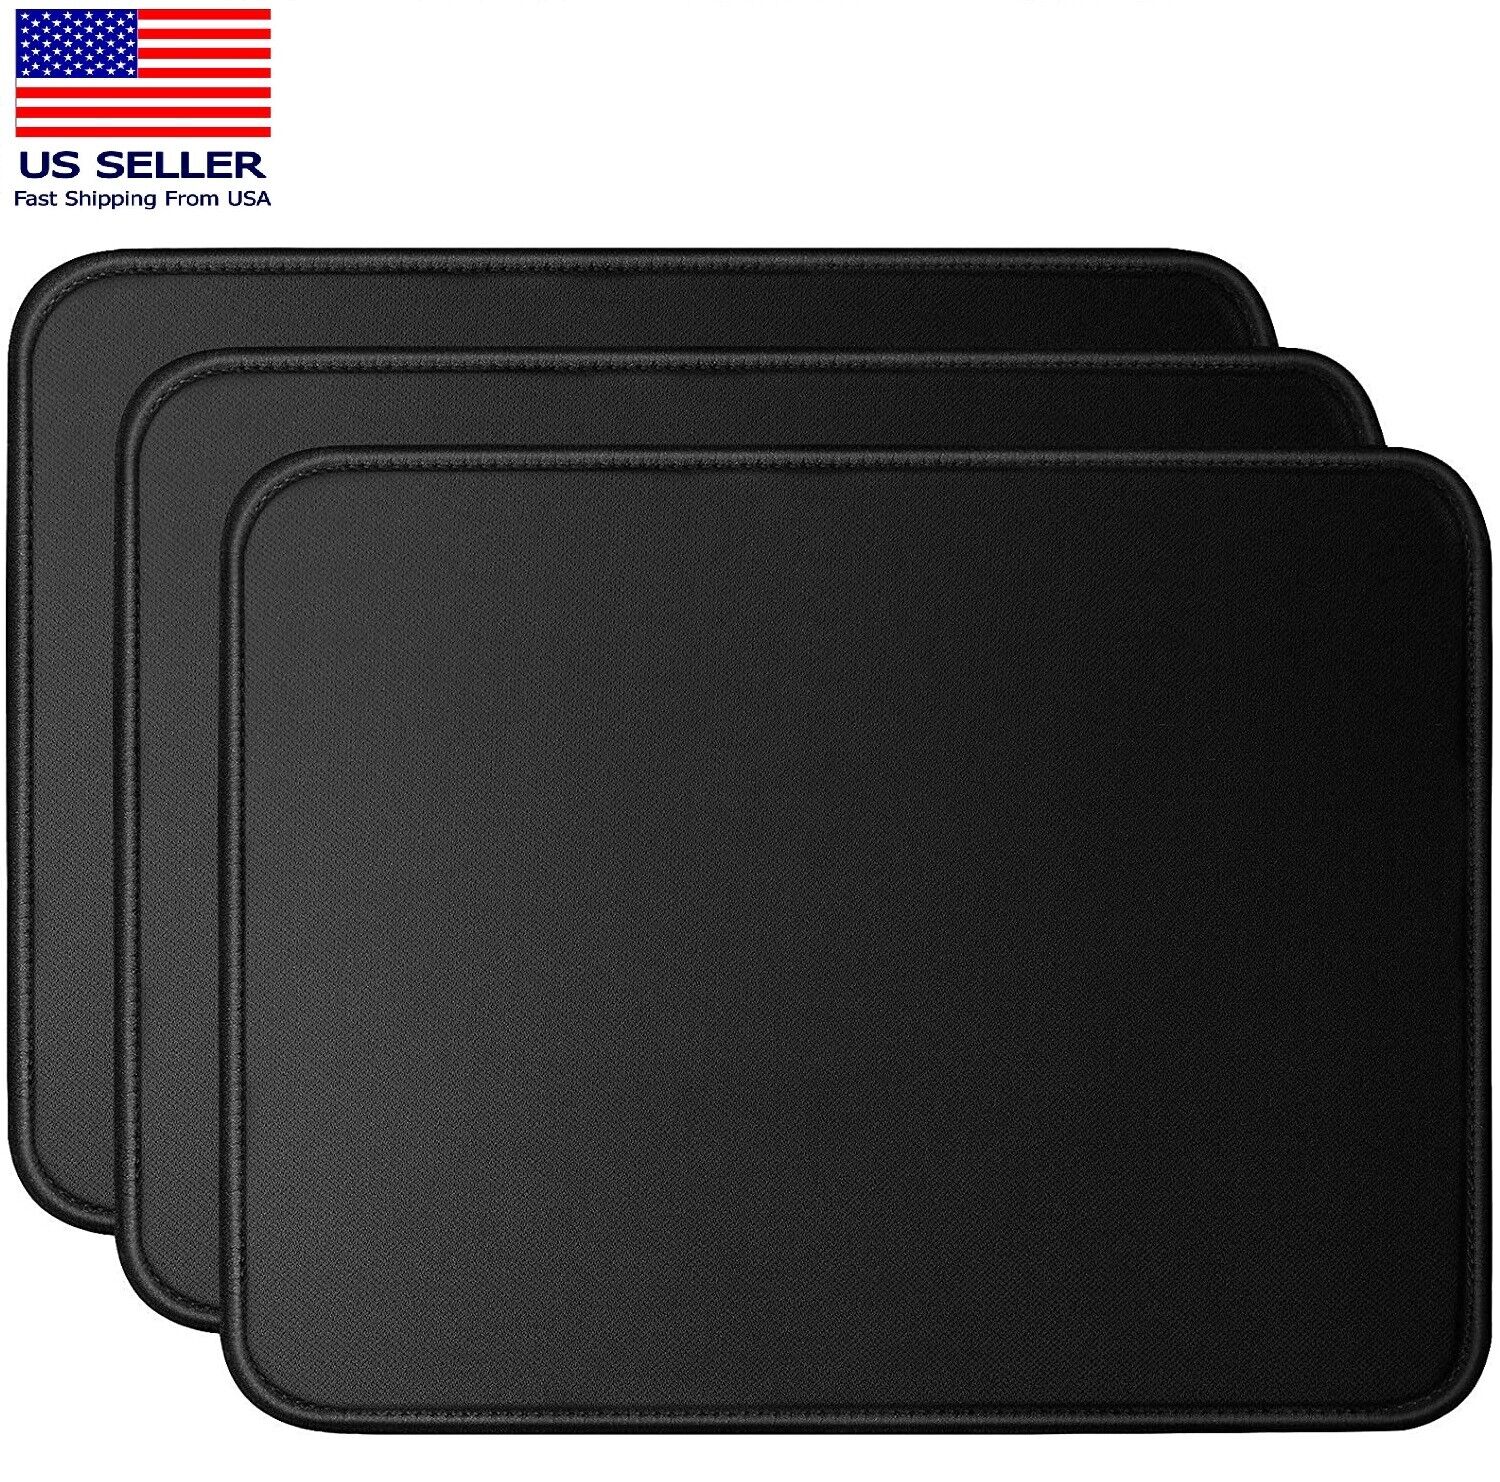 8.7x11 Mouse Pad Stitched Edges Non-slip Waterproof Gaming Mousepad Thick Black